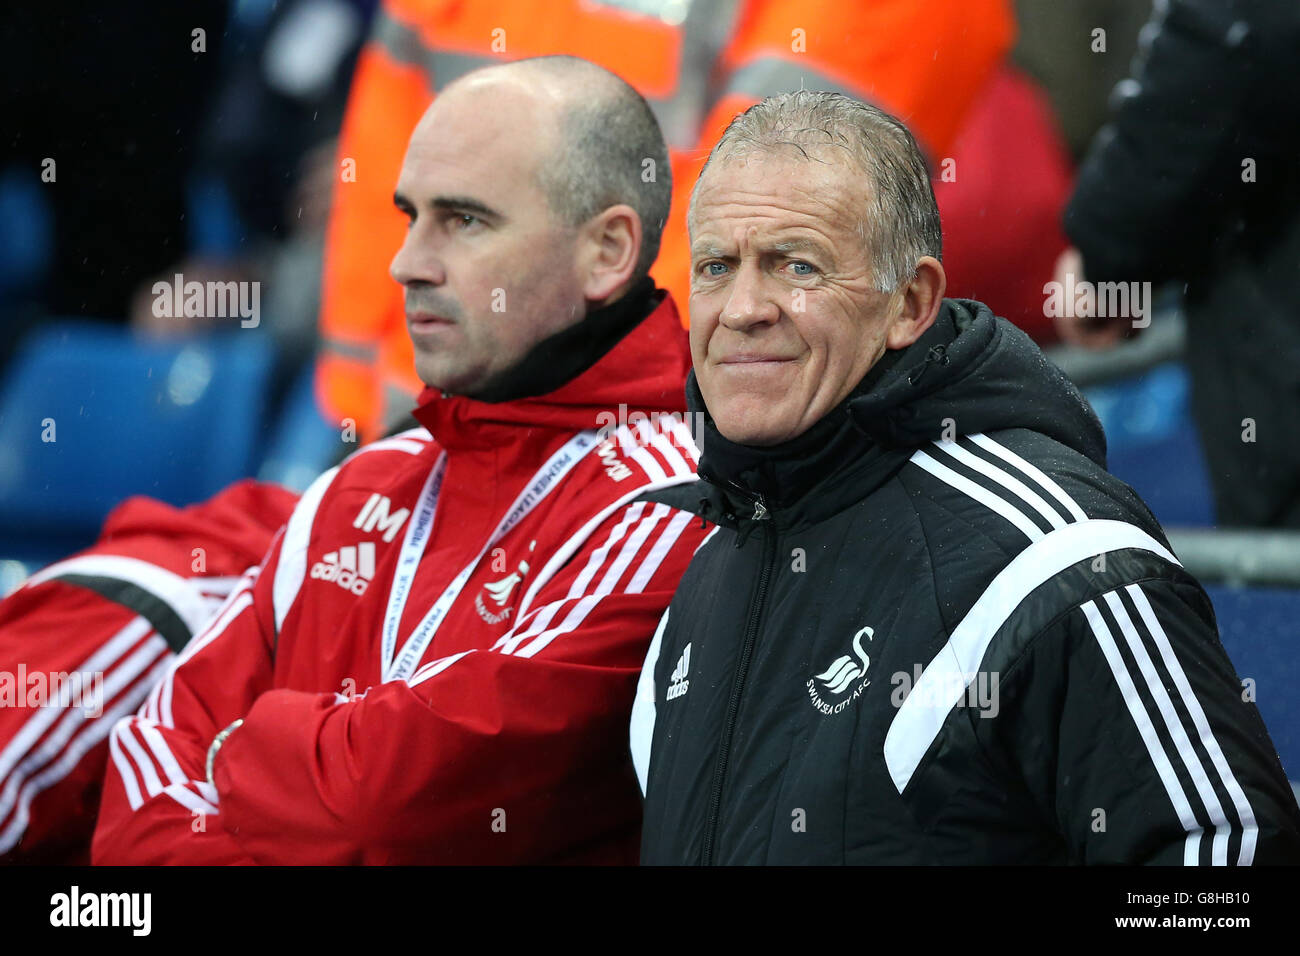 Swansea City caretaker manager Alan Curtis (right) during the Barclays Premier League match at the Etihad Stadium, Manchester. PRESS ASSOCIATION Photo. Picture date: Saturday December 12, 2015. See PA story SOCCER Man City. Photo credit should read: Martin Rickett/PA Wire. No use with unauthorised audio, video, data, fixture lists, club/league logos or 'live' services. Stock Photo